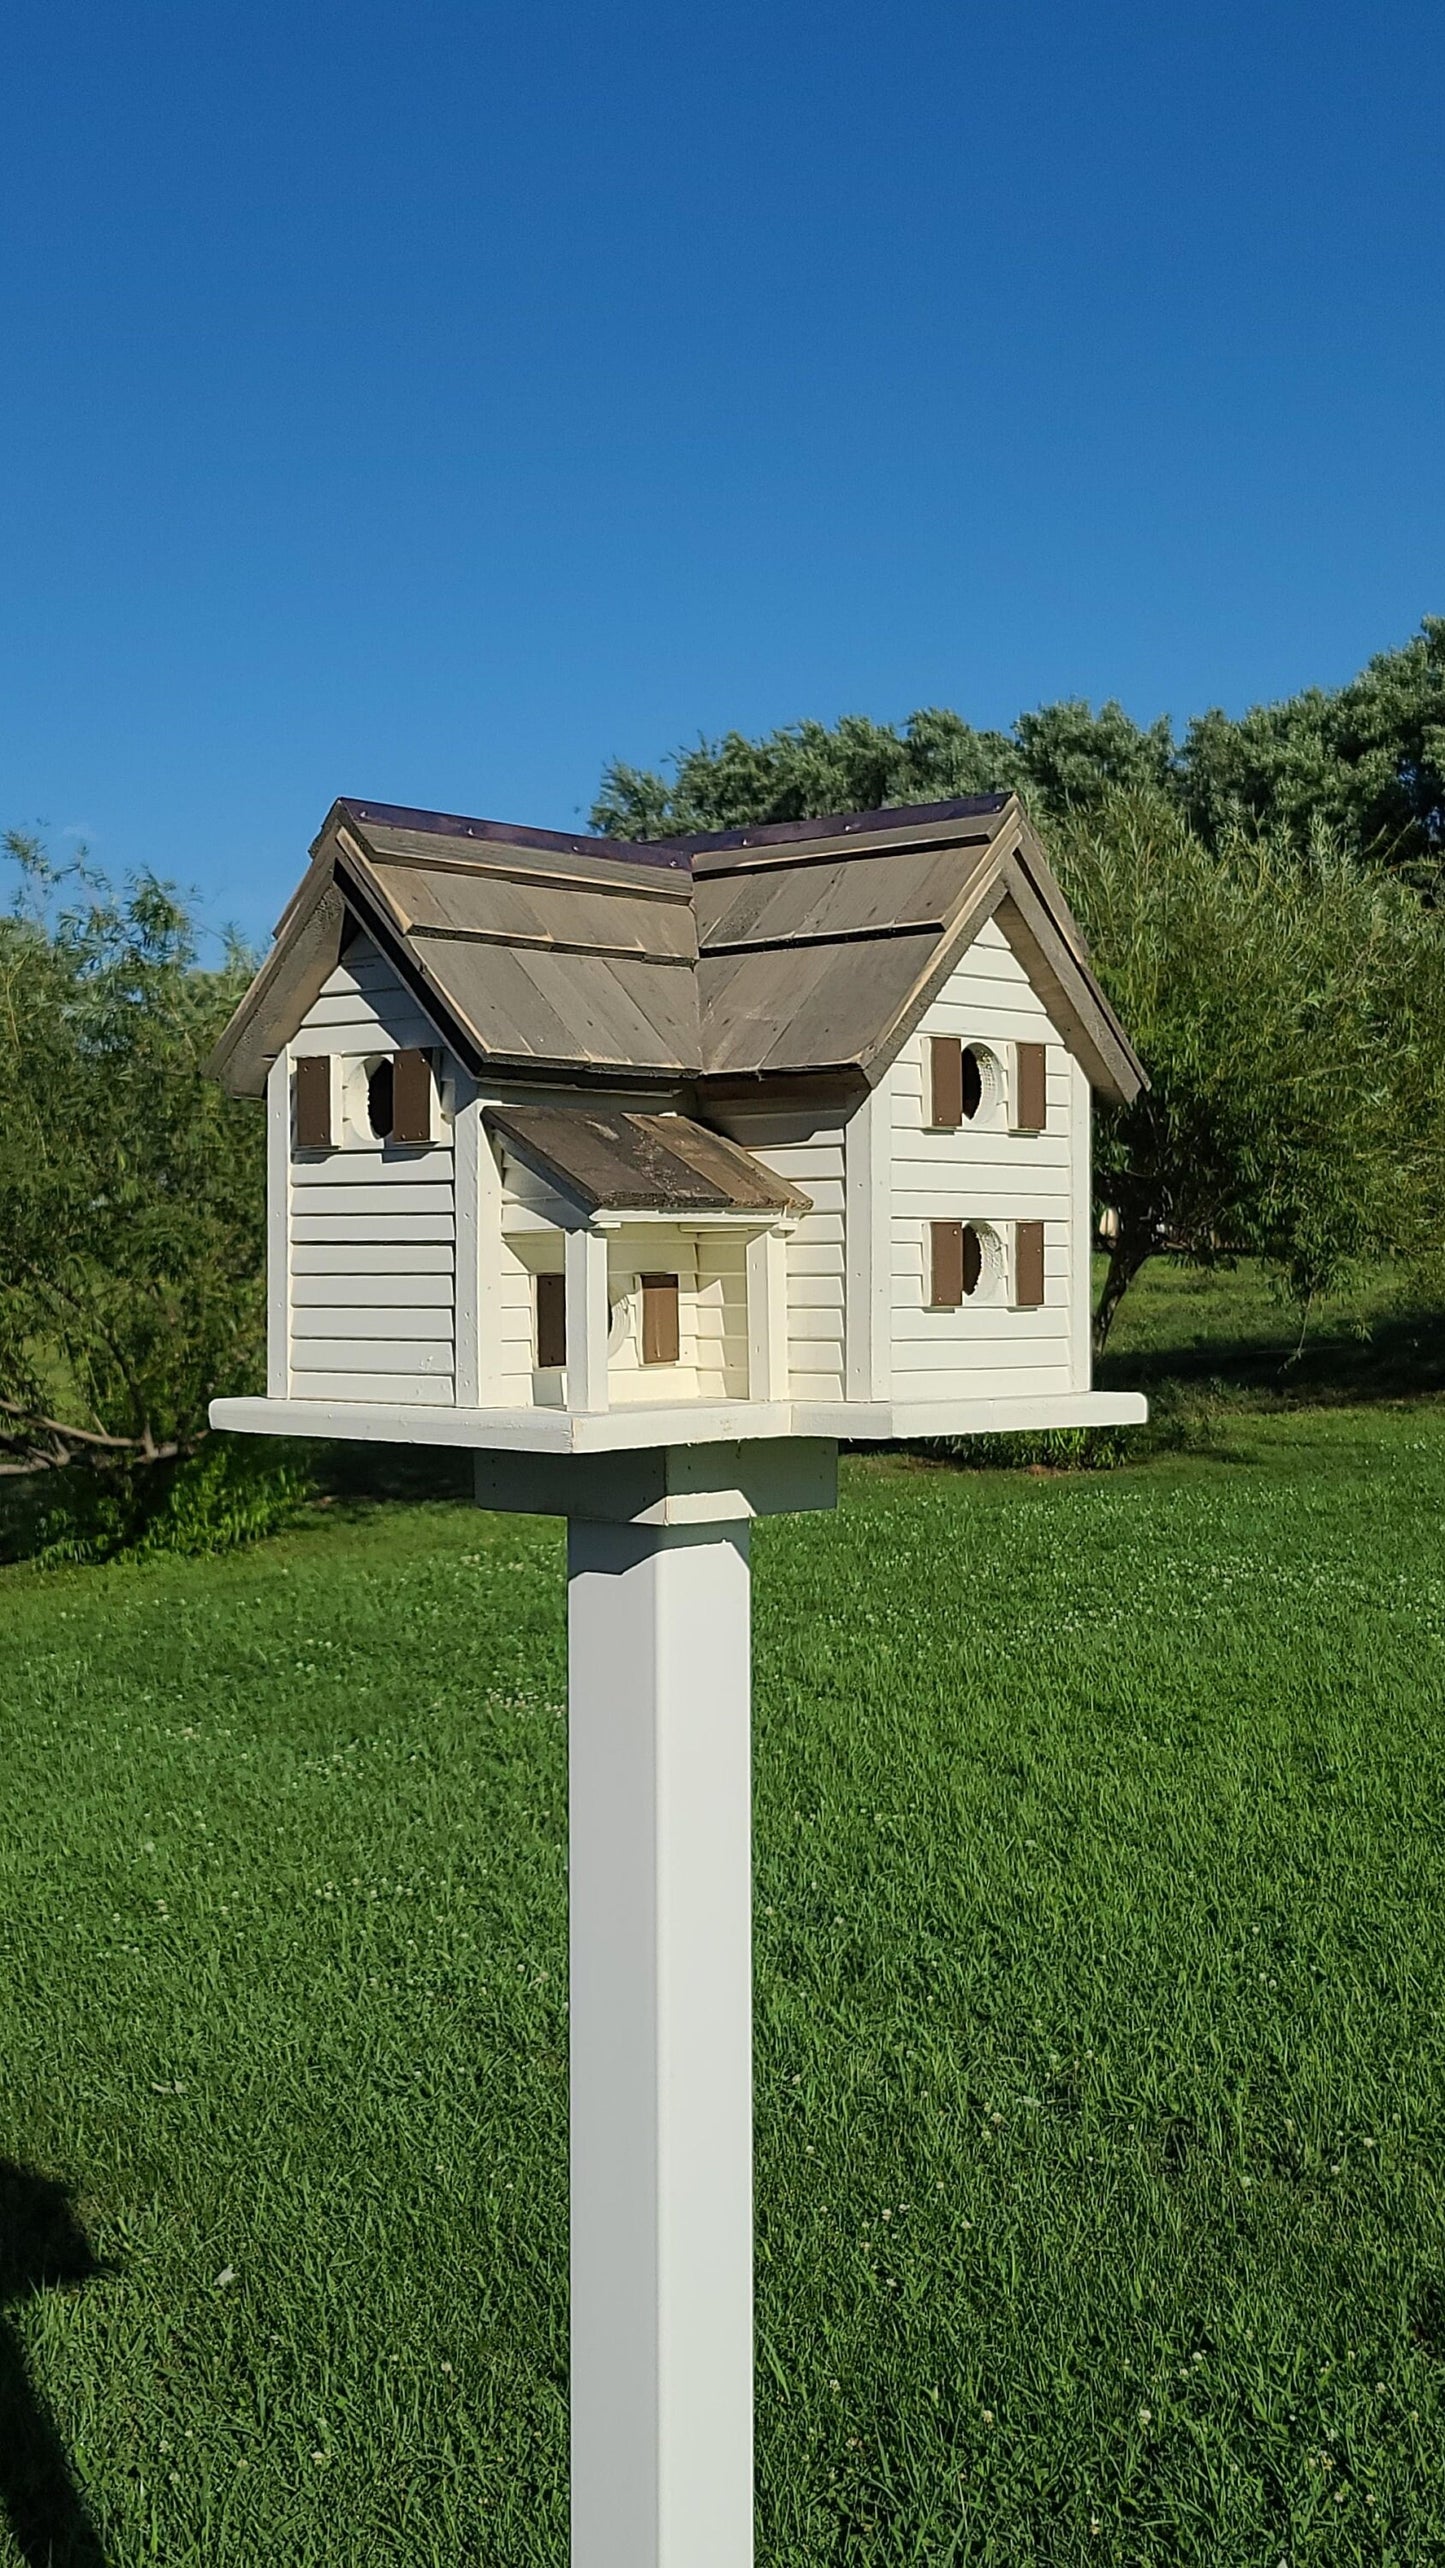 Reclaimed Cottage Birdhouse with copper